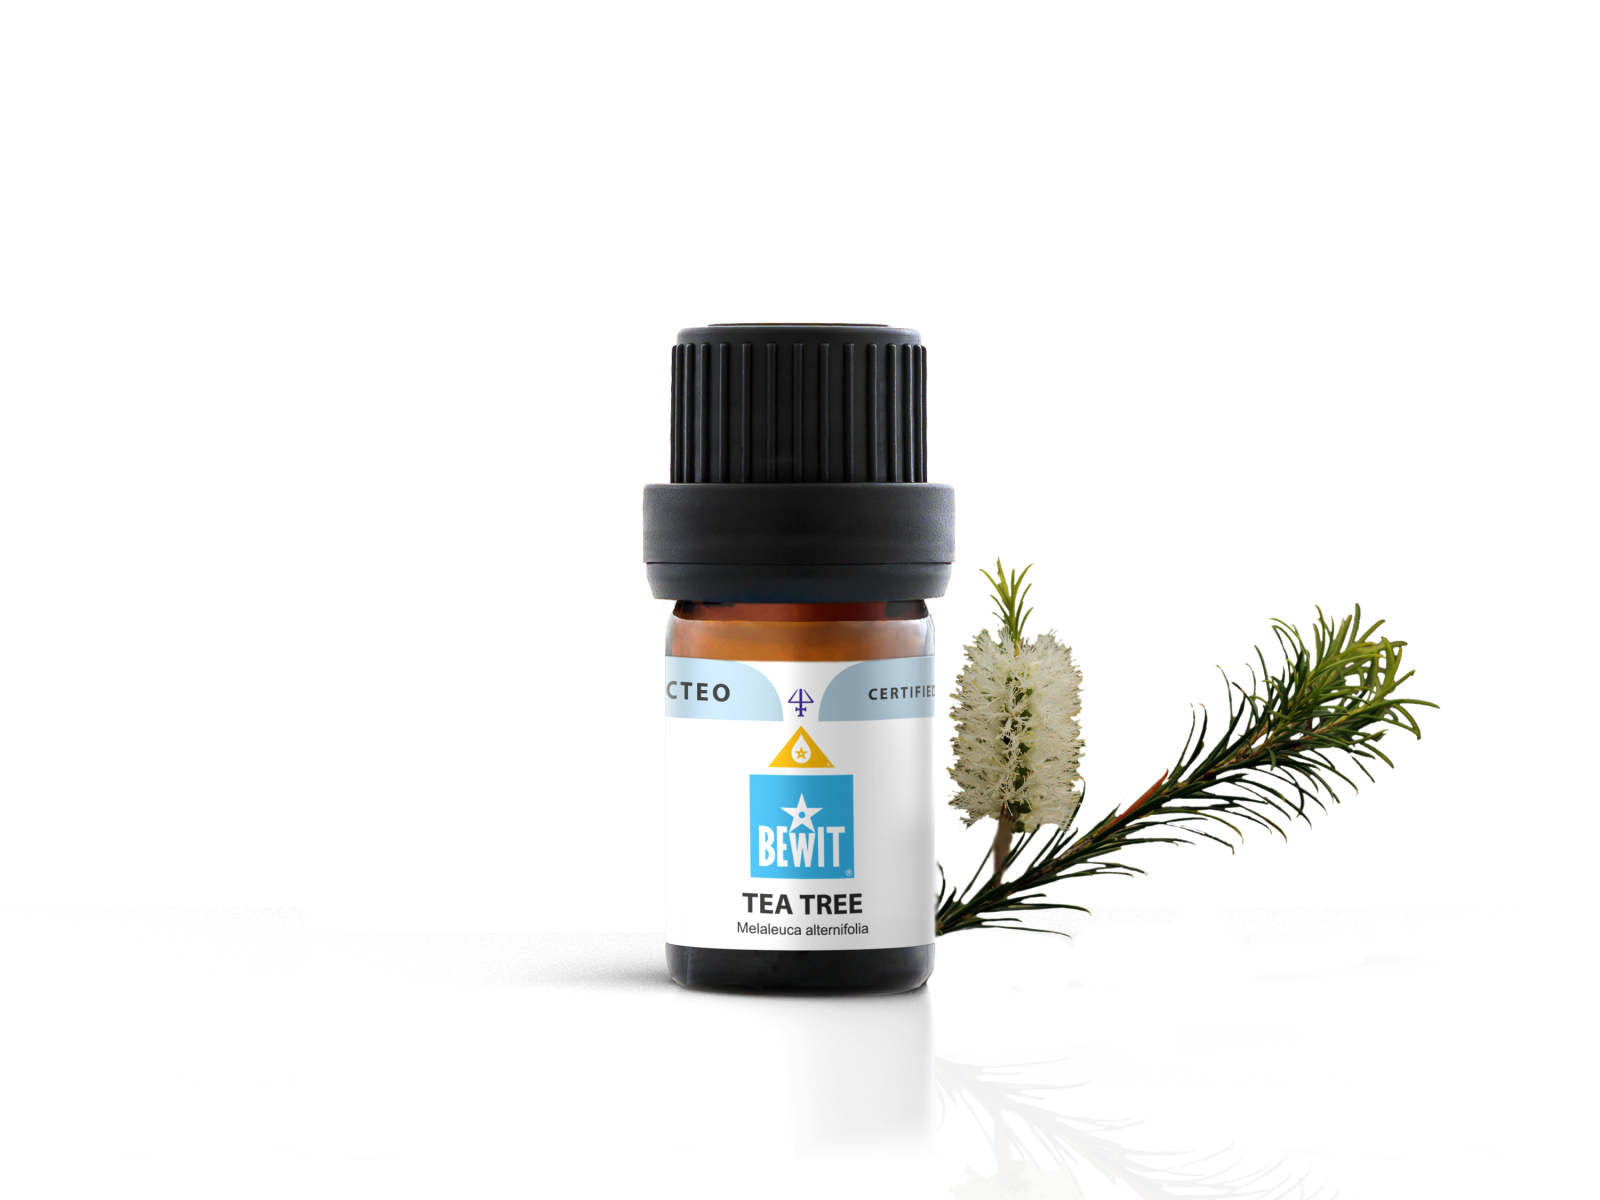 BEWIT Tea tree - 100% pure and natural CTEO® essential oil - 2